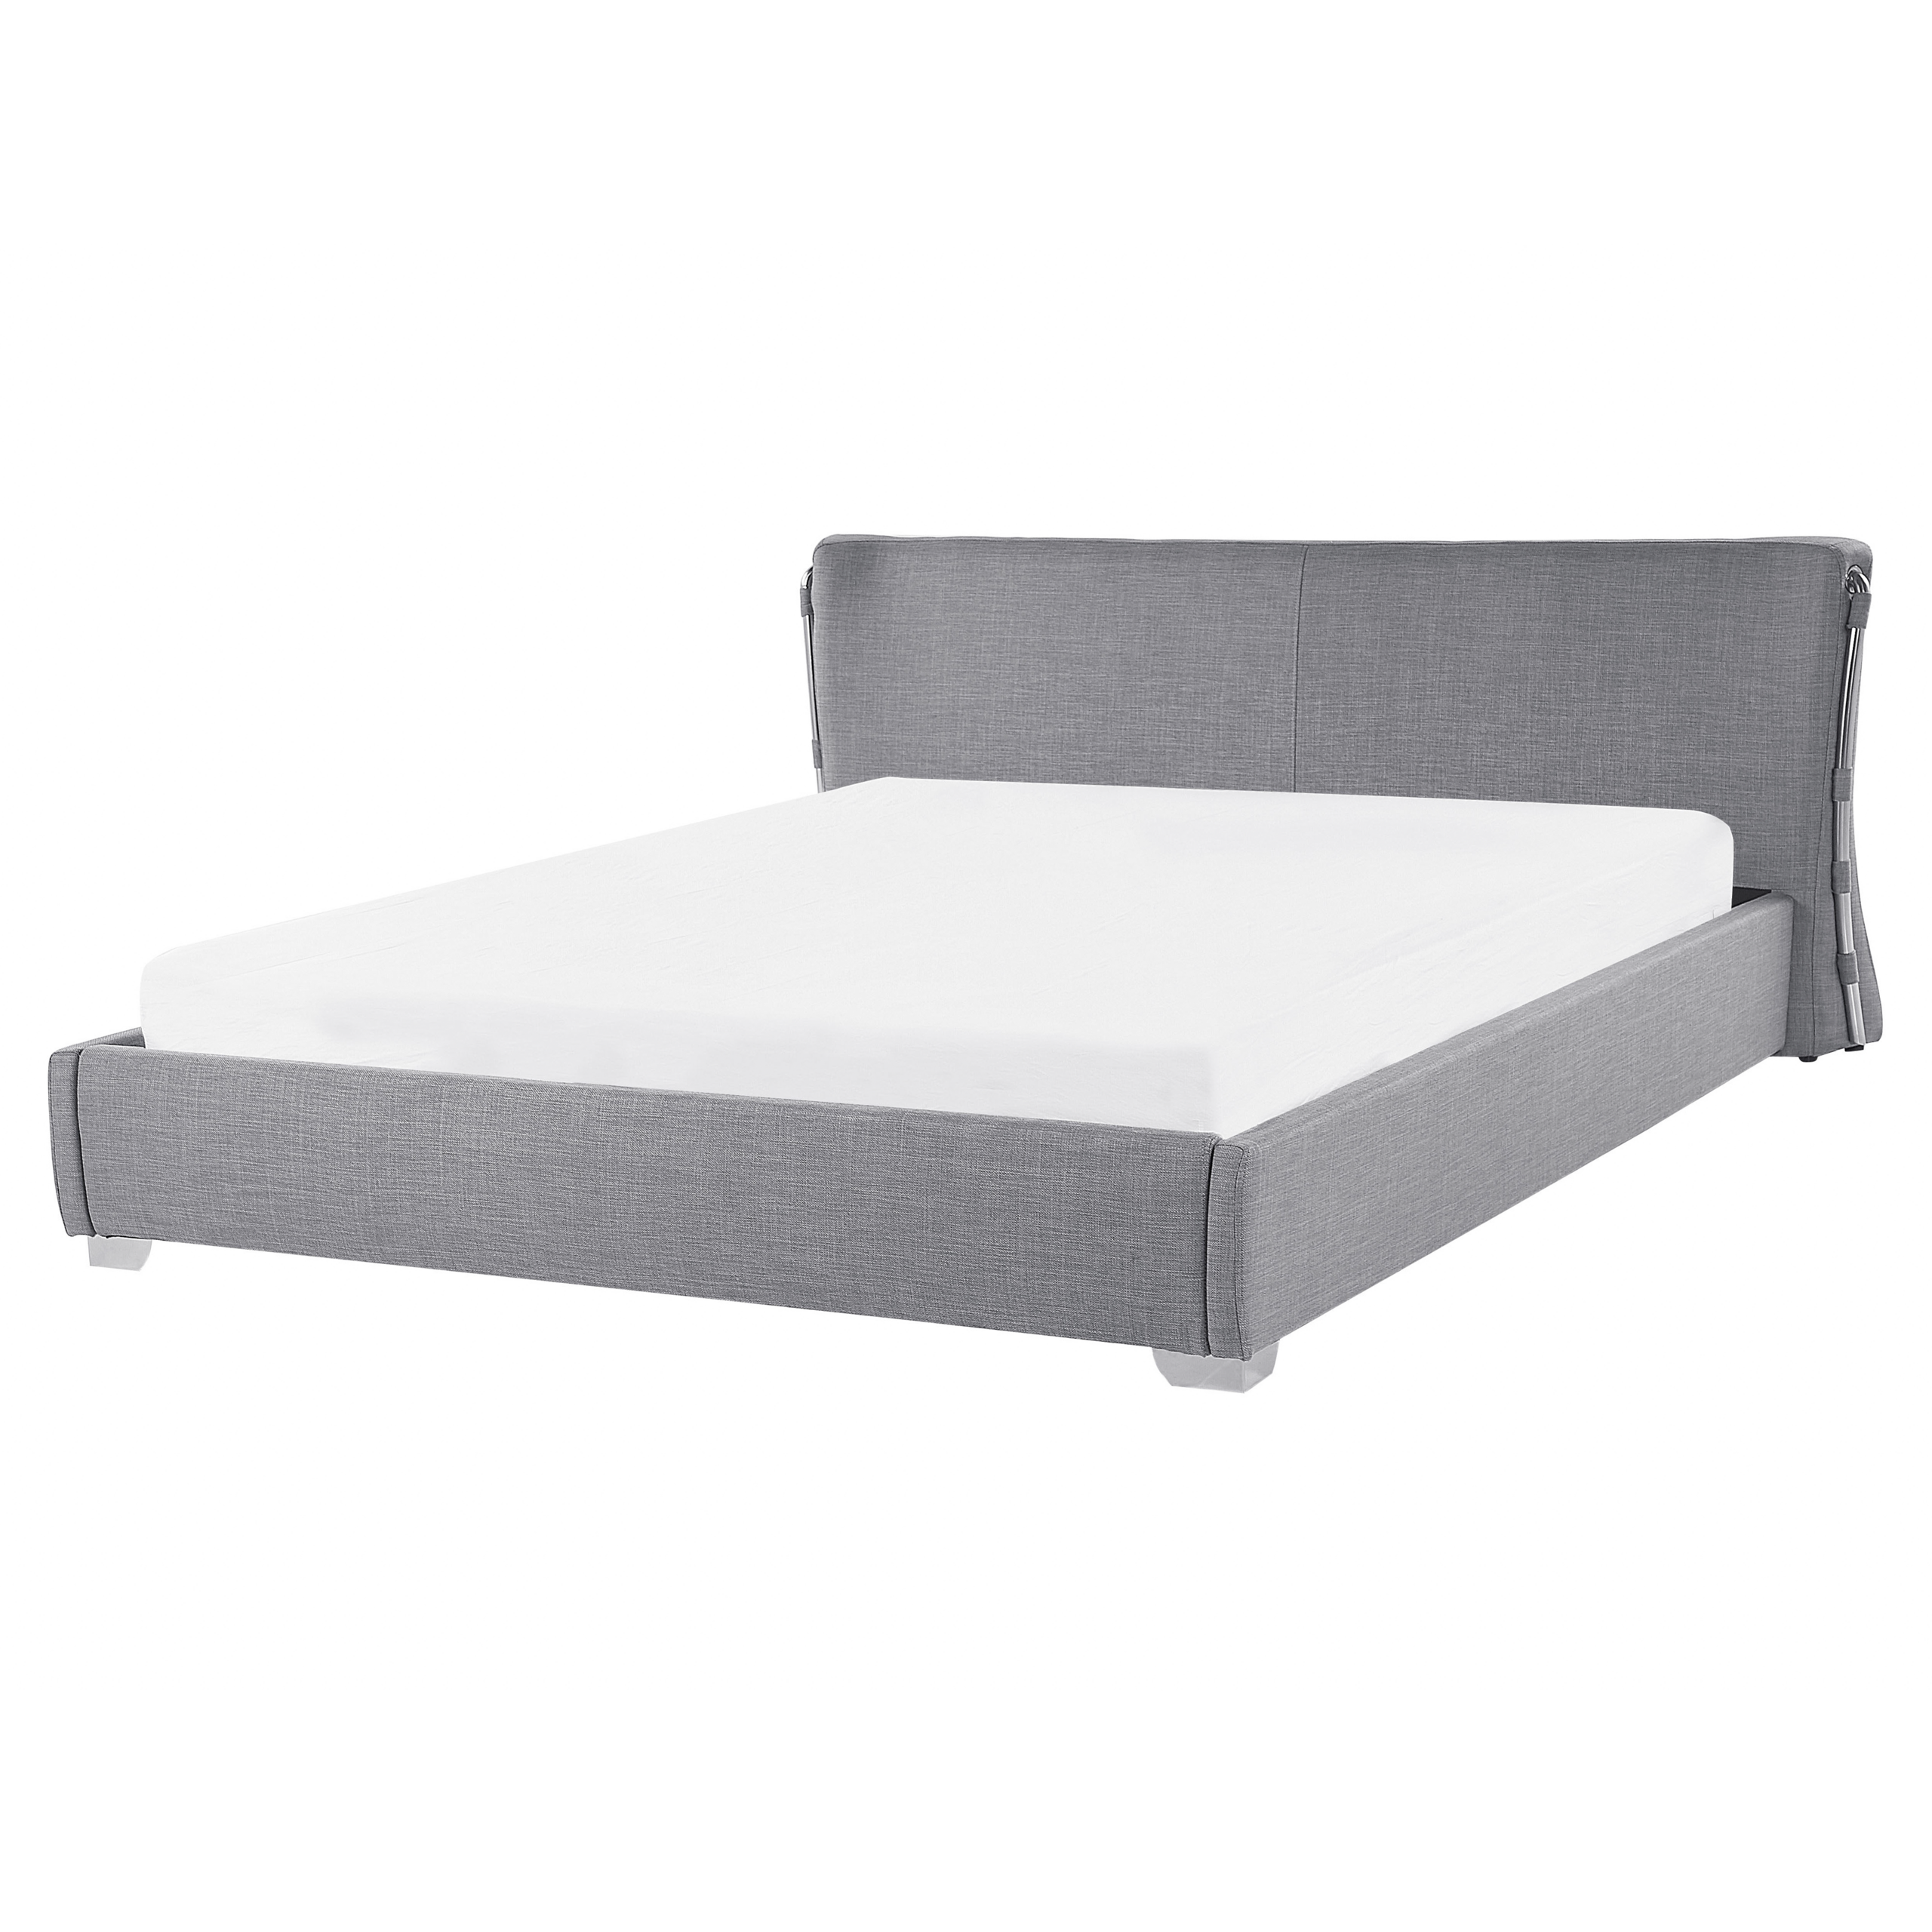 Beliani EU King Size Waterbed 5ft3 Grey Fabric with Accessories Contemporary